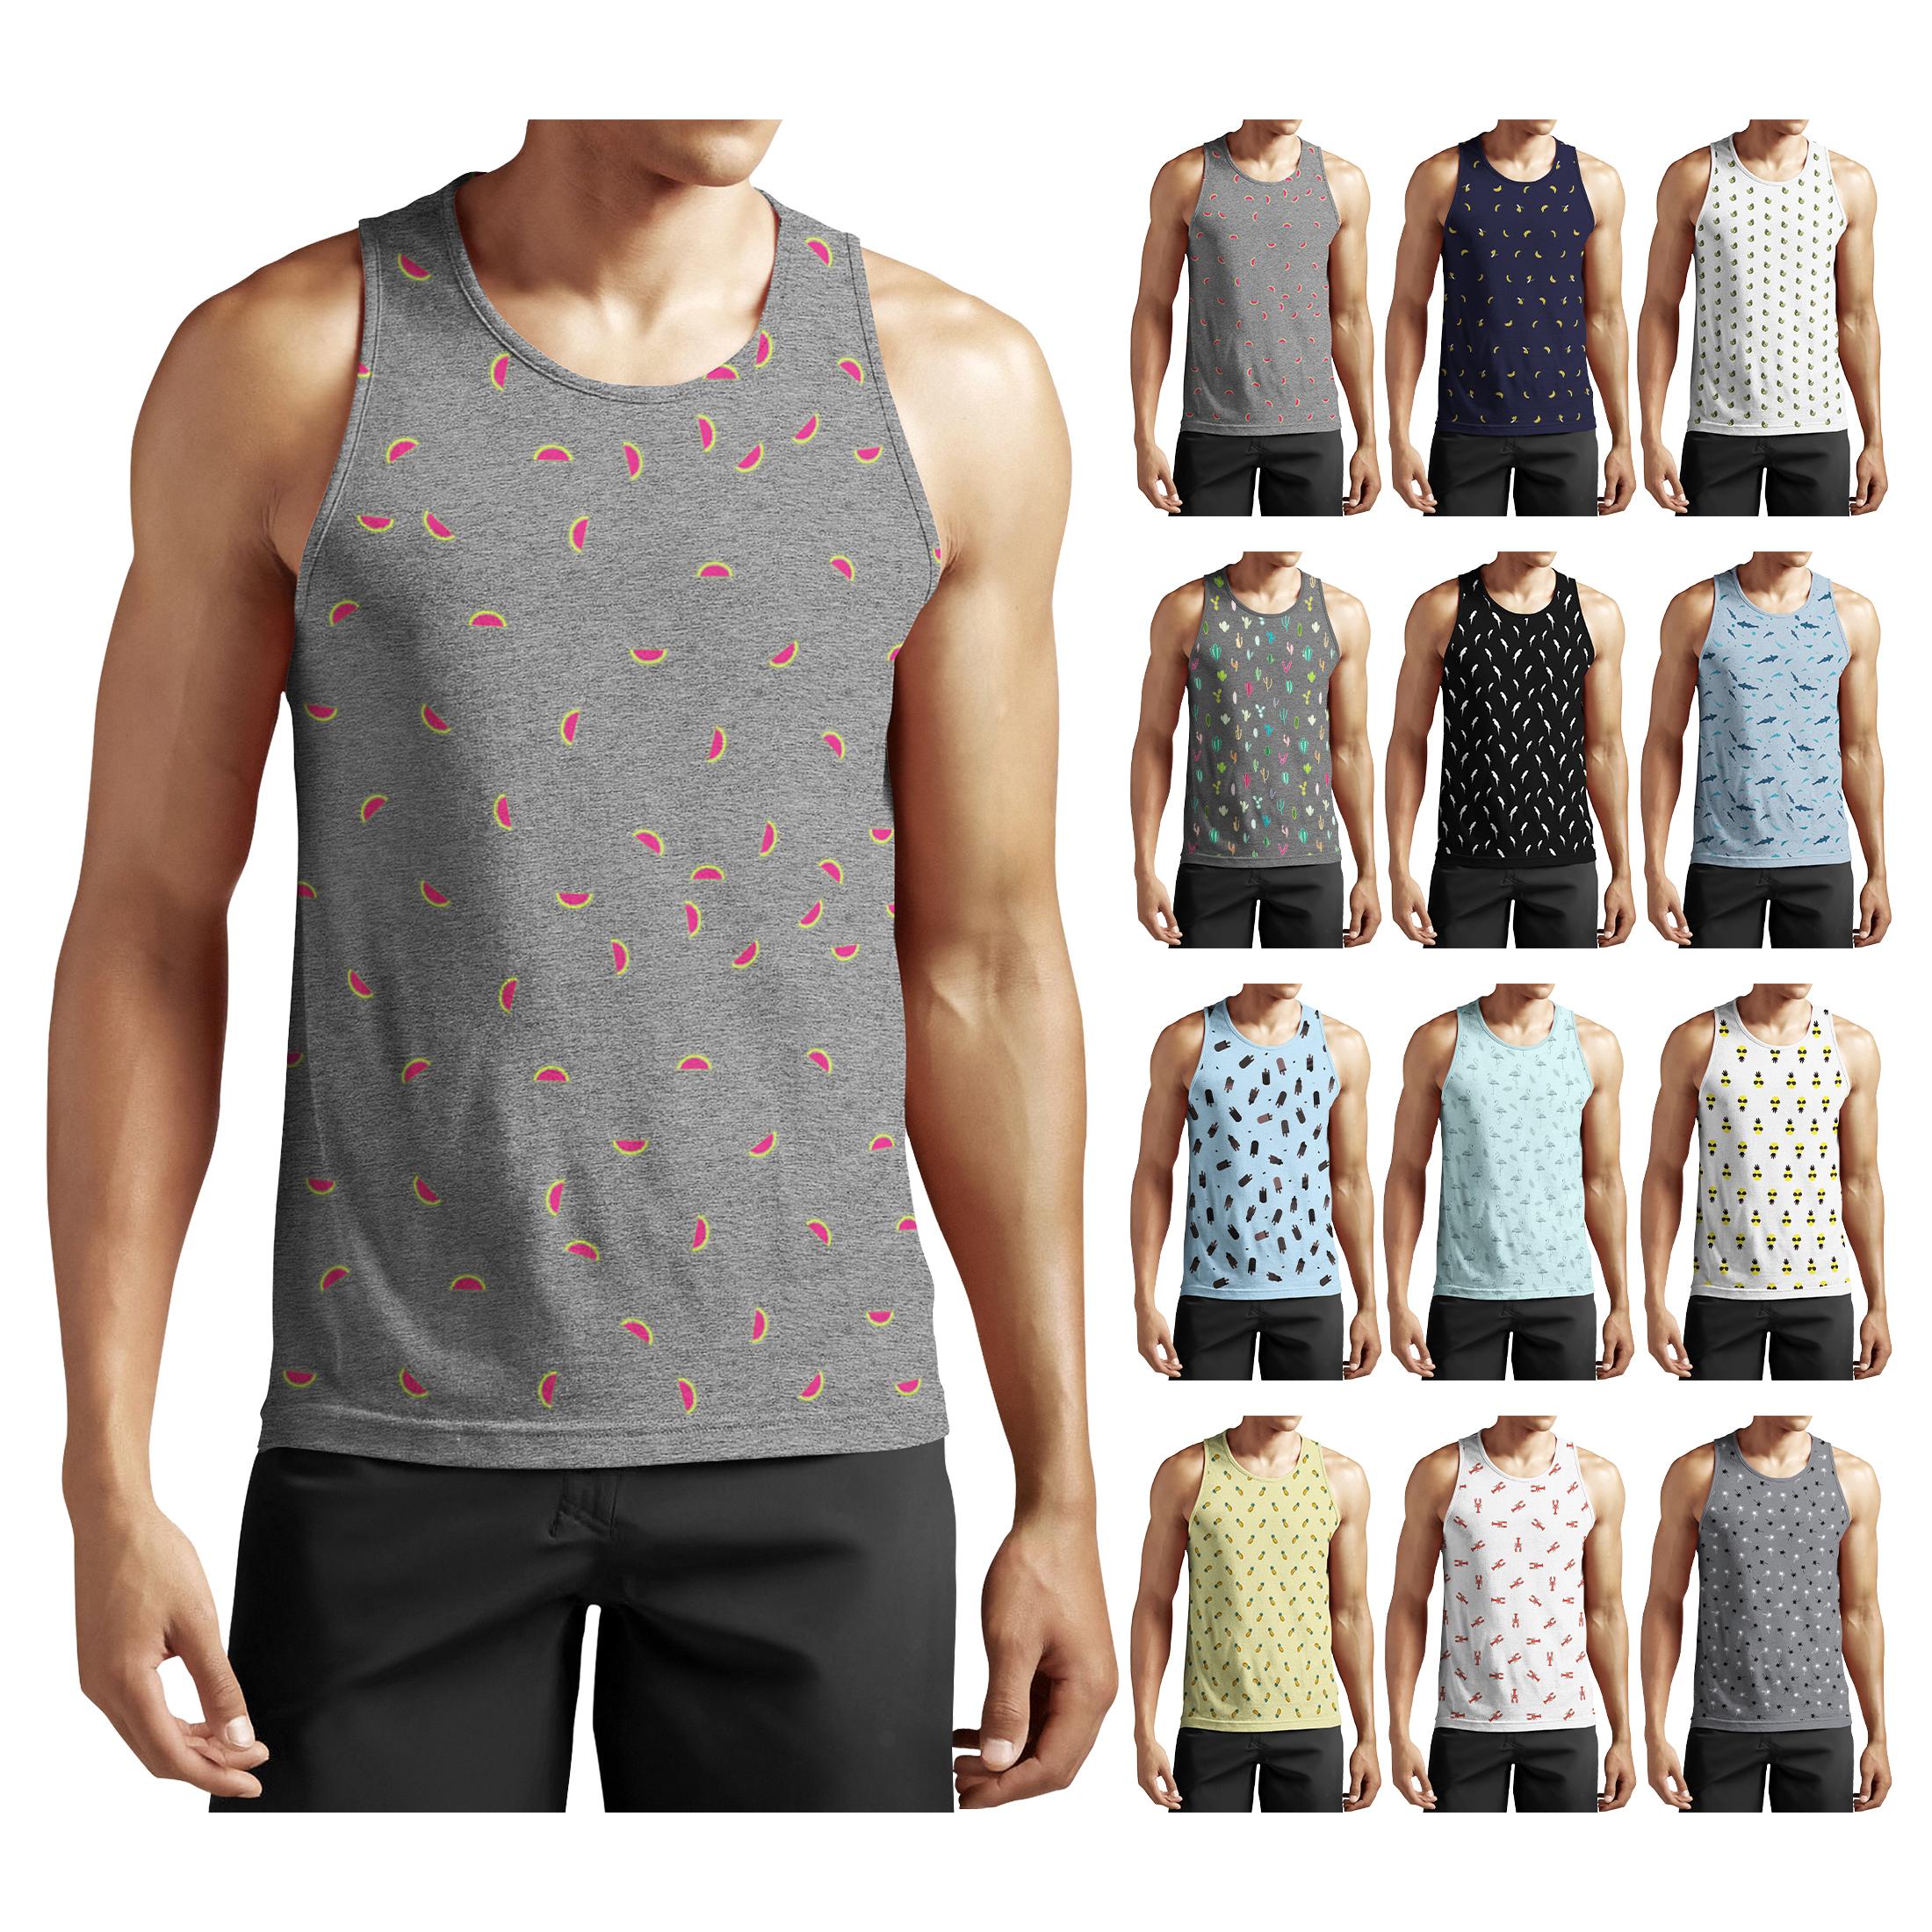 4-Pack Men's Muscle Tank Tops Active Athletic Crew Neck Moisture Wicking Quick Dry Breathable Sleeveless Fitness Shirts Gym Workout Tees - M